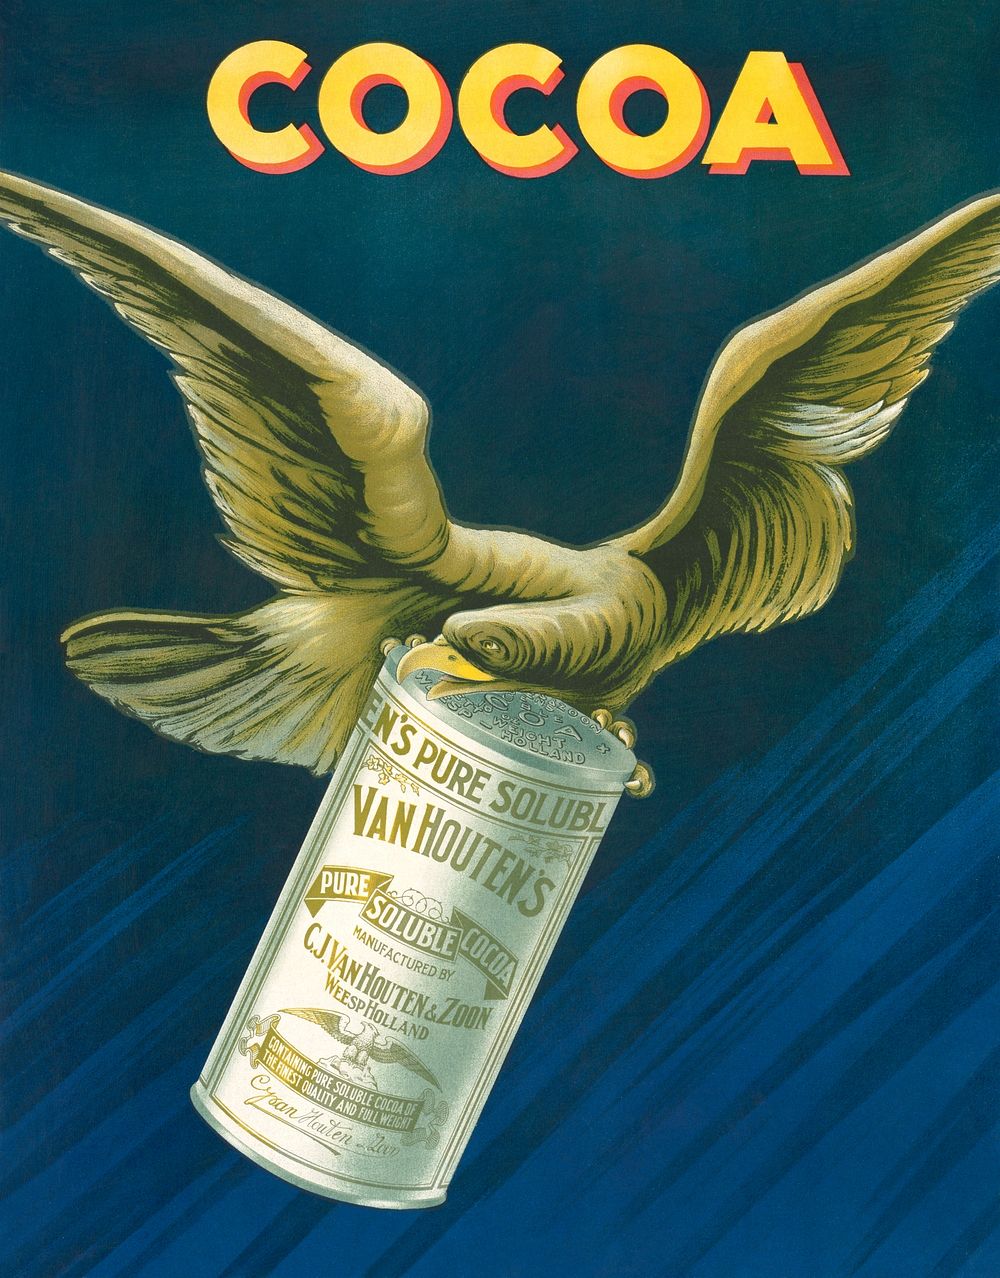 Cocoa (1890)  by Van Houten, vintage advertisement poster. Original public domain image from the Library of Congress.…